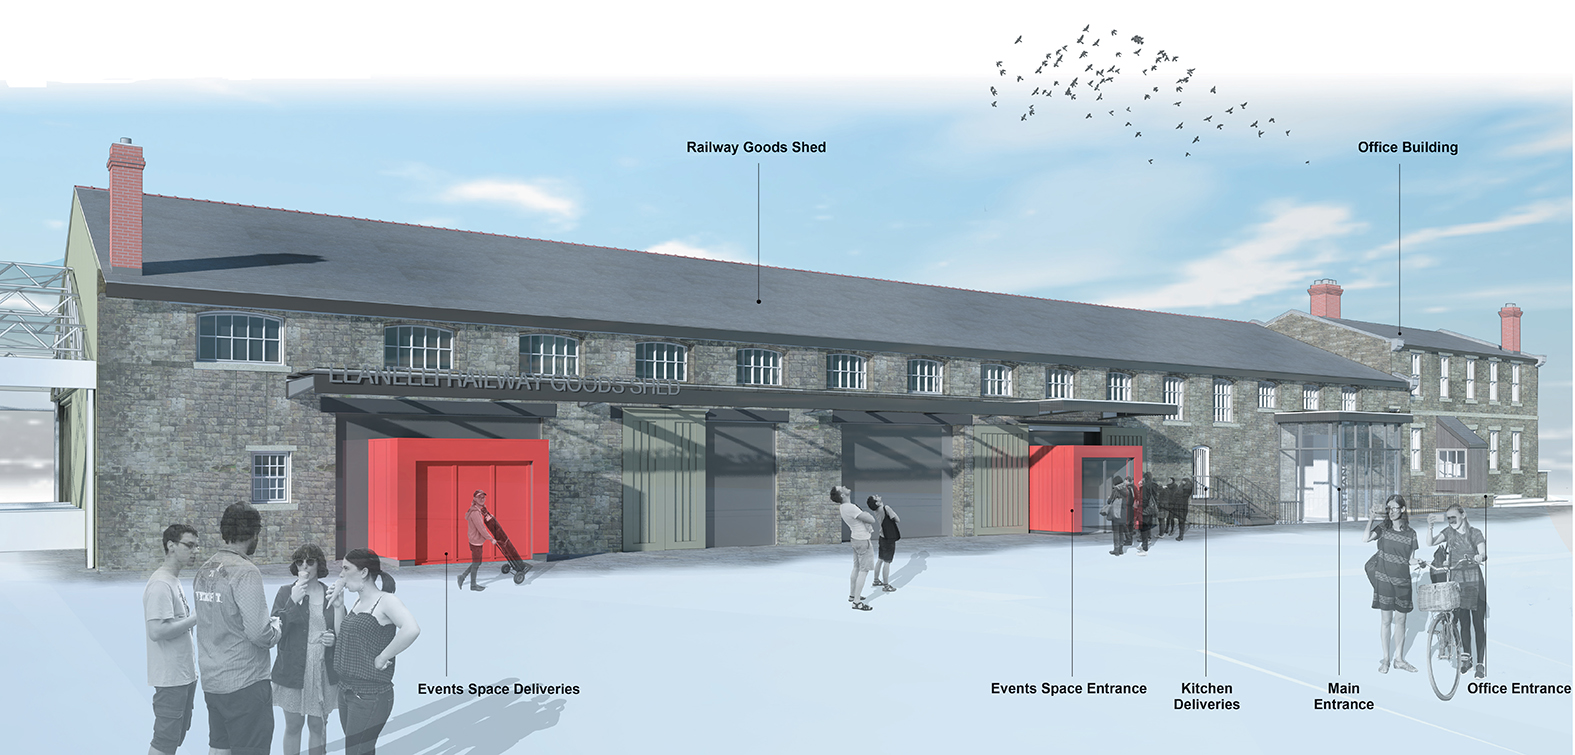 Another giant step forward for Goods Shed project in Llanelli